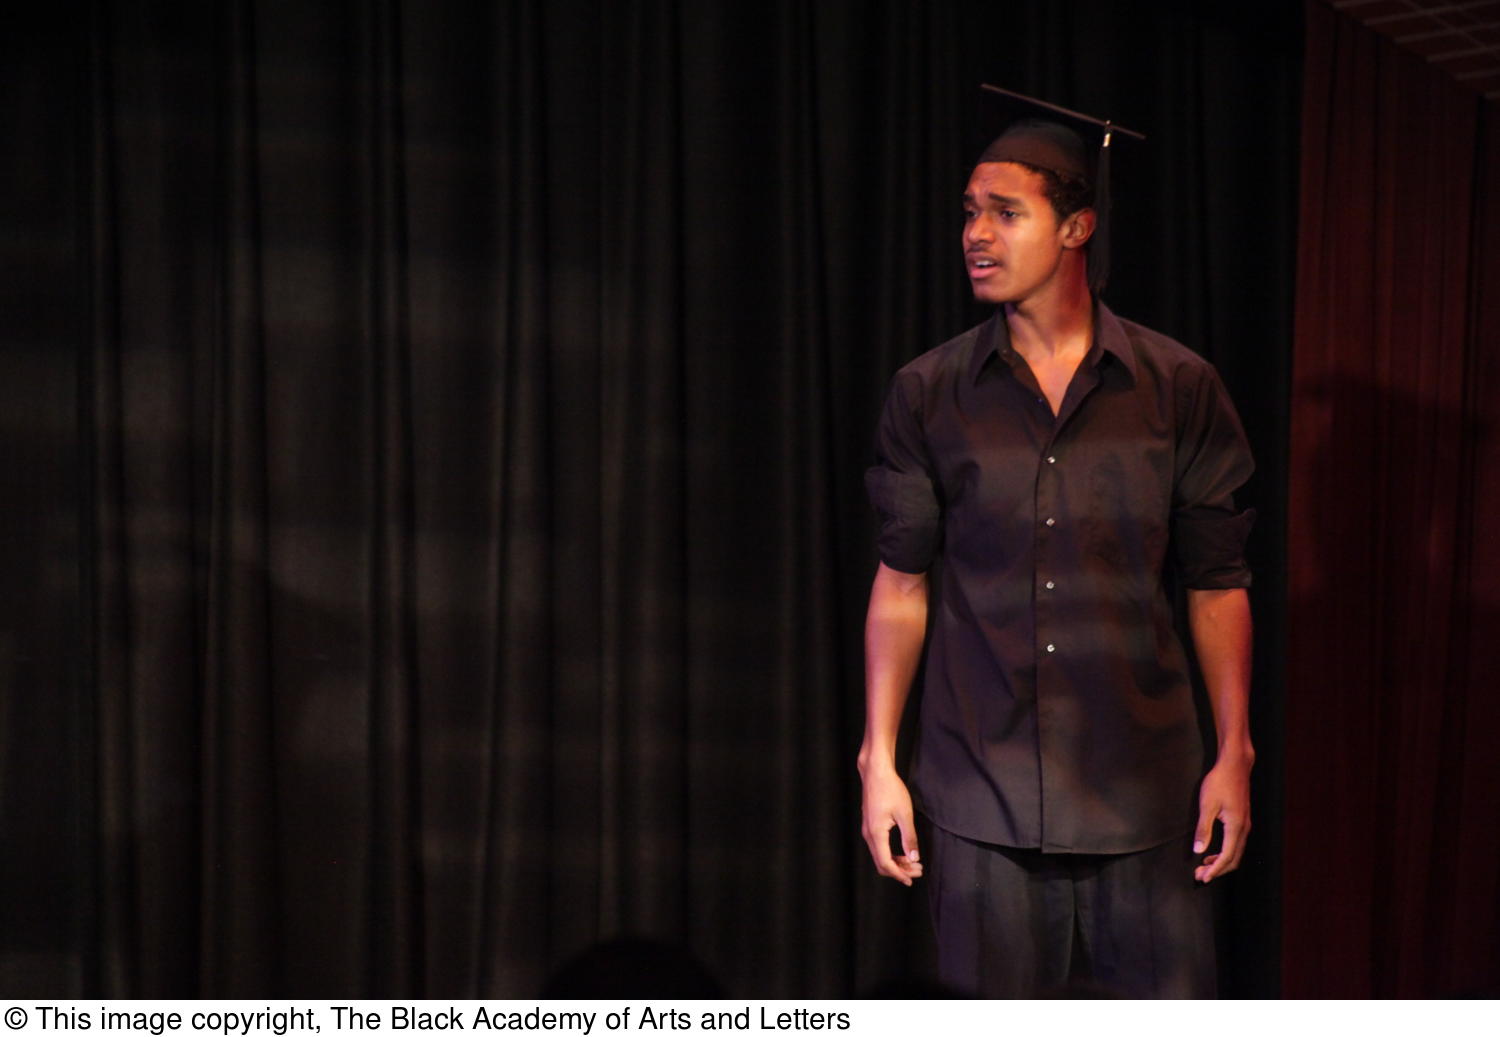 [Performer Wearing Graduation Cap on Stage]
                                                
                                                    [Sequence #]: 1 of 1
                                                